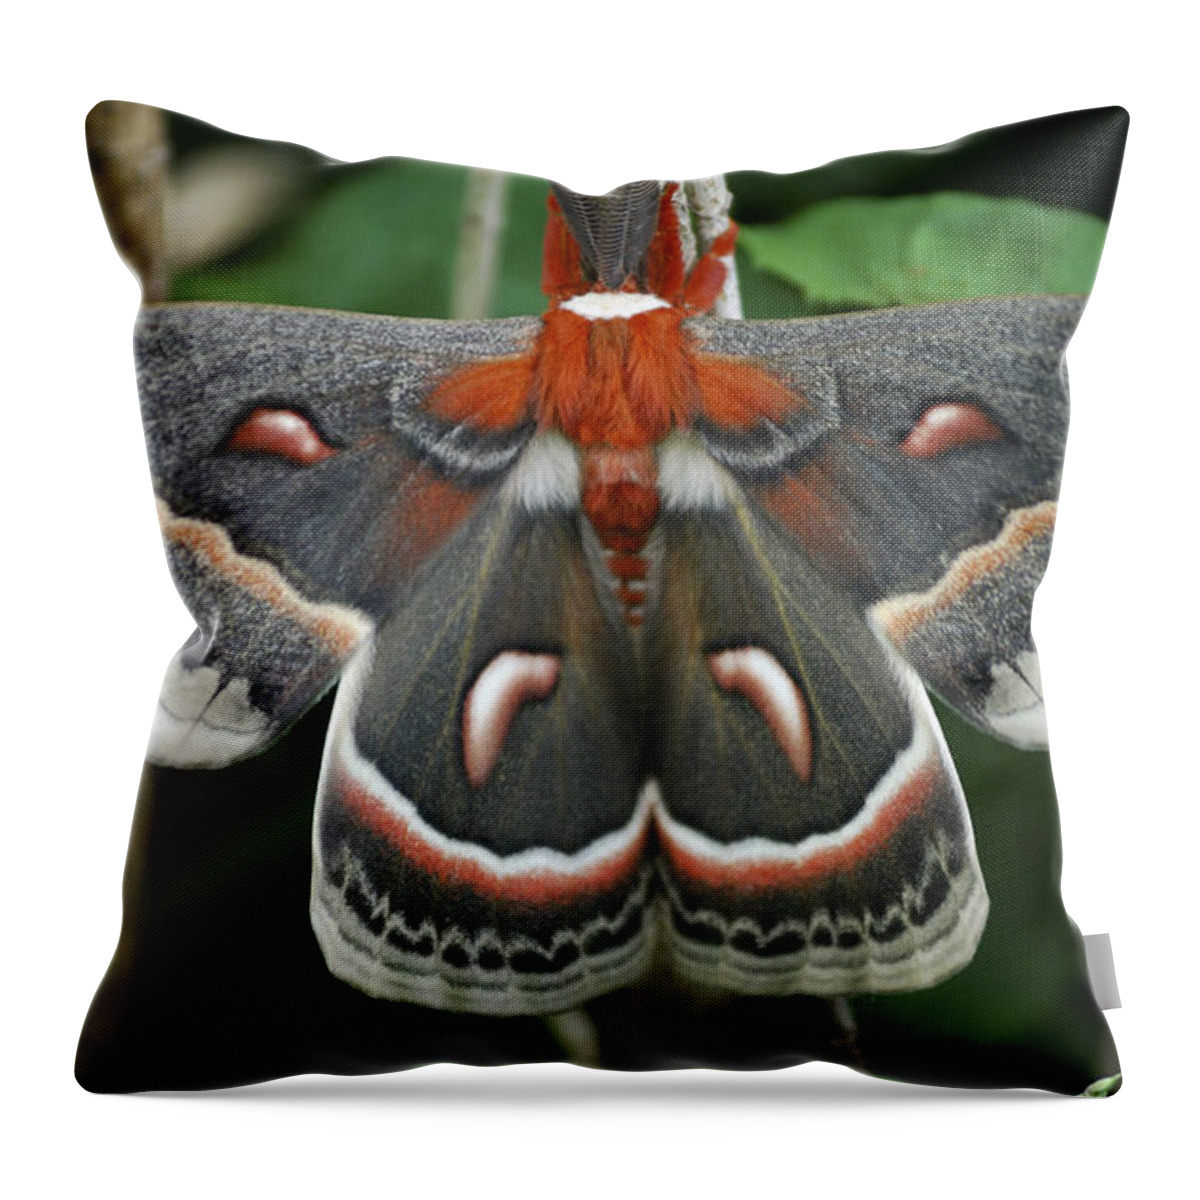 Cecropia Moth Throw Pillow featuring the photograph Happy Birthday by Randy Bodkins